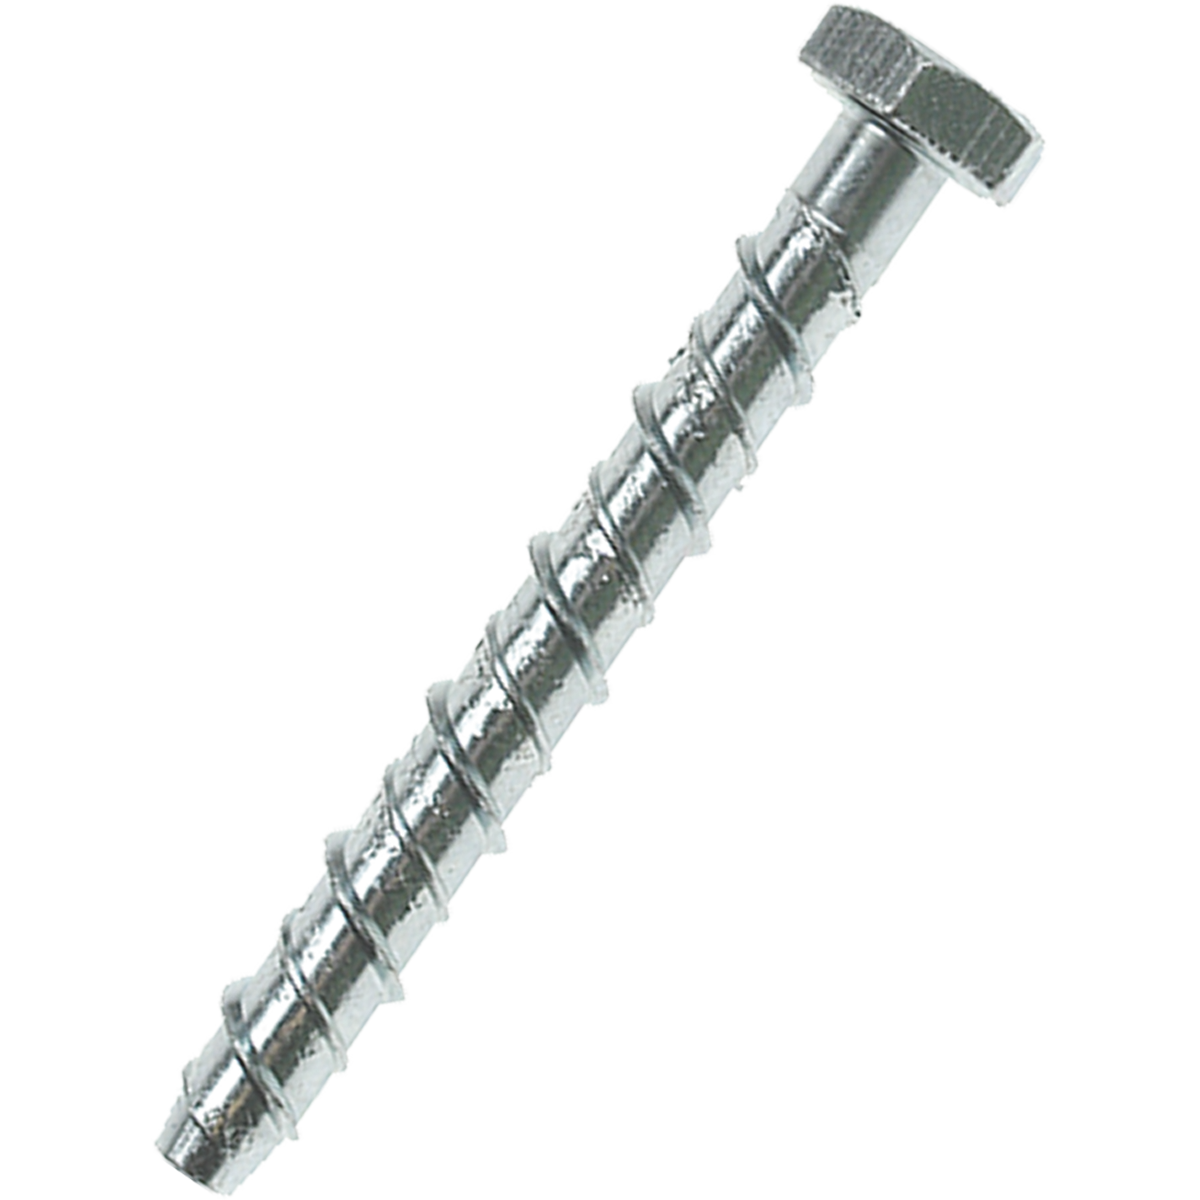 Hex head Ankerbolt, also know as anchor bolts, at competitive prices. An effective light duty anchor for use with concrete, stone, brick and block work.